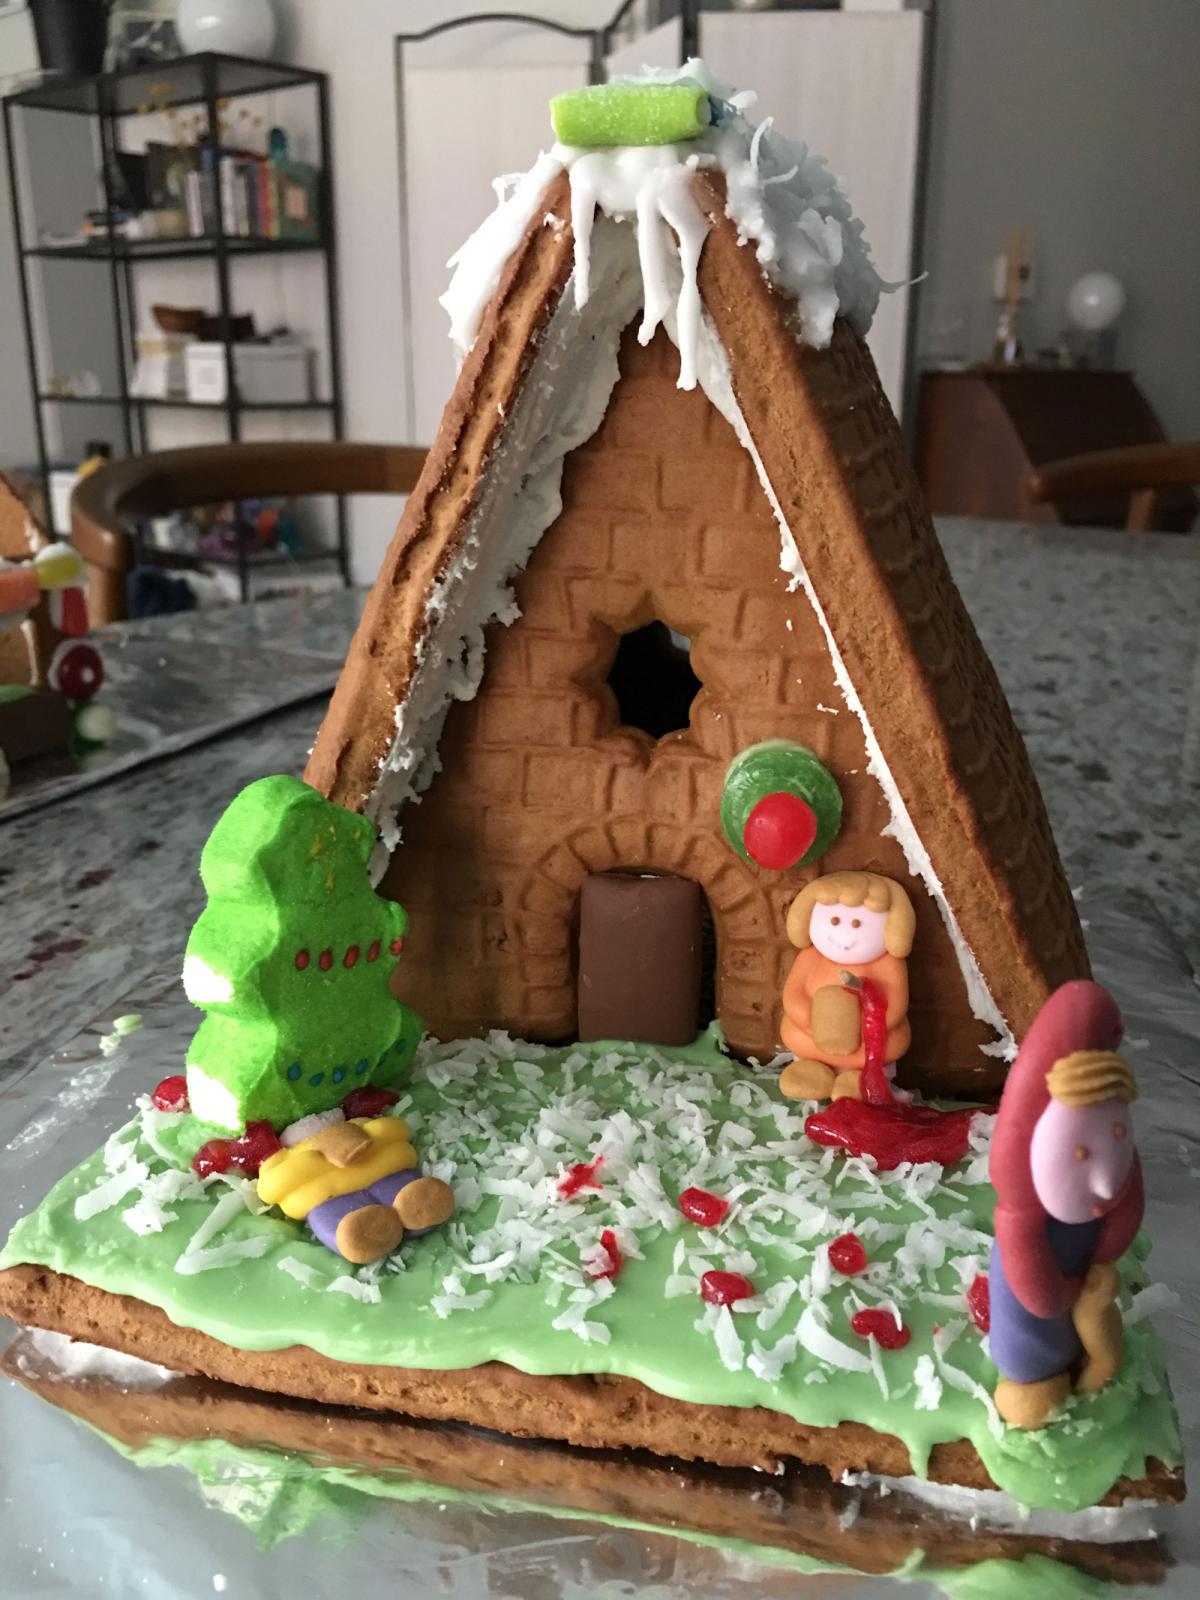 Gingerbread house decorated with candy.